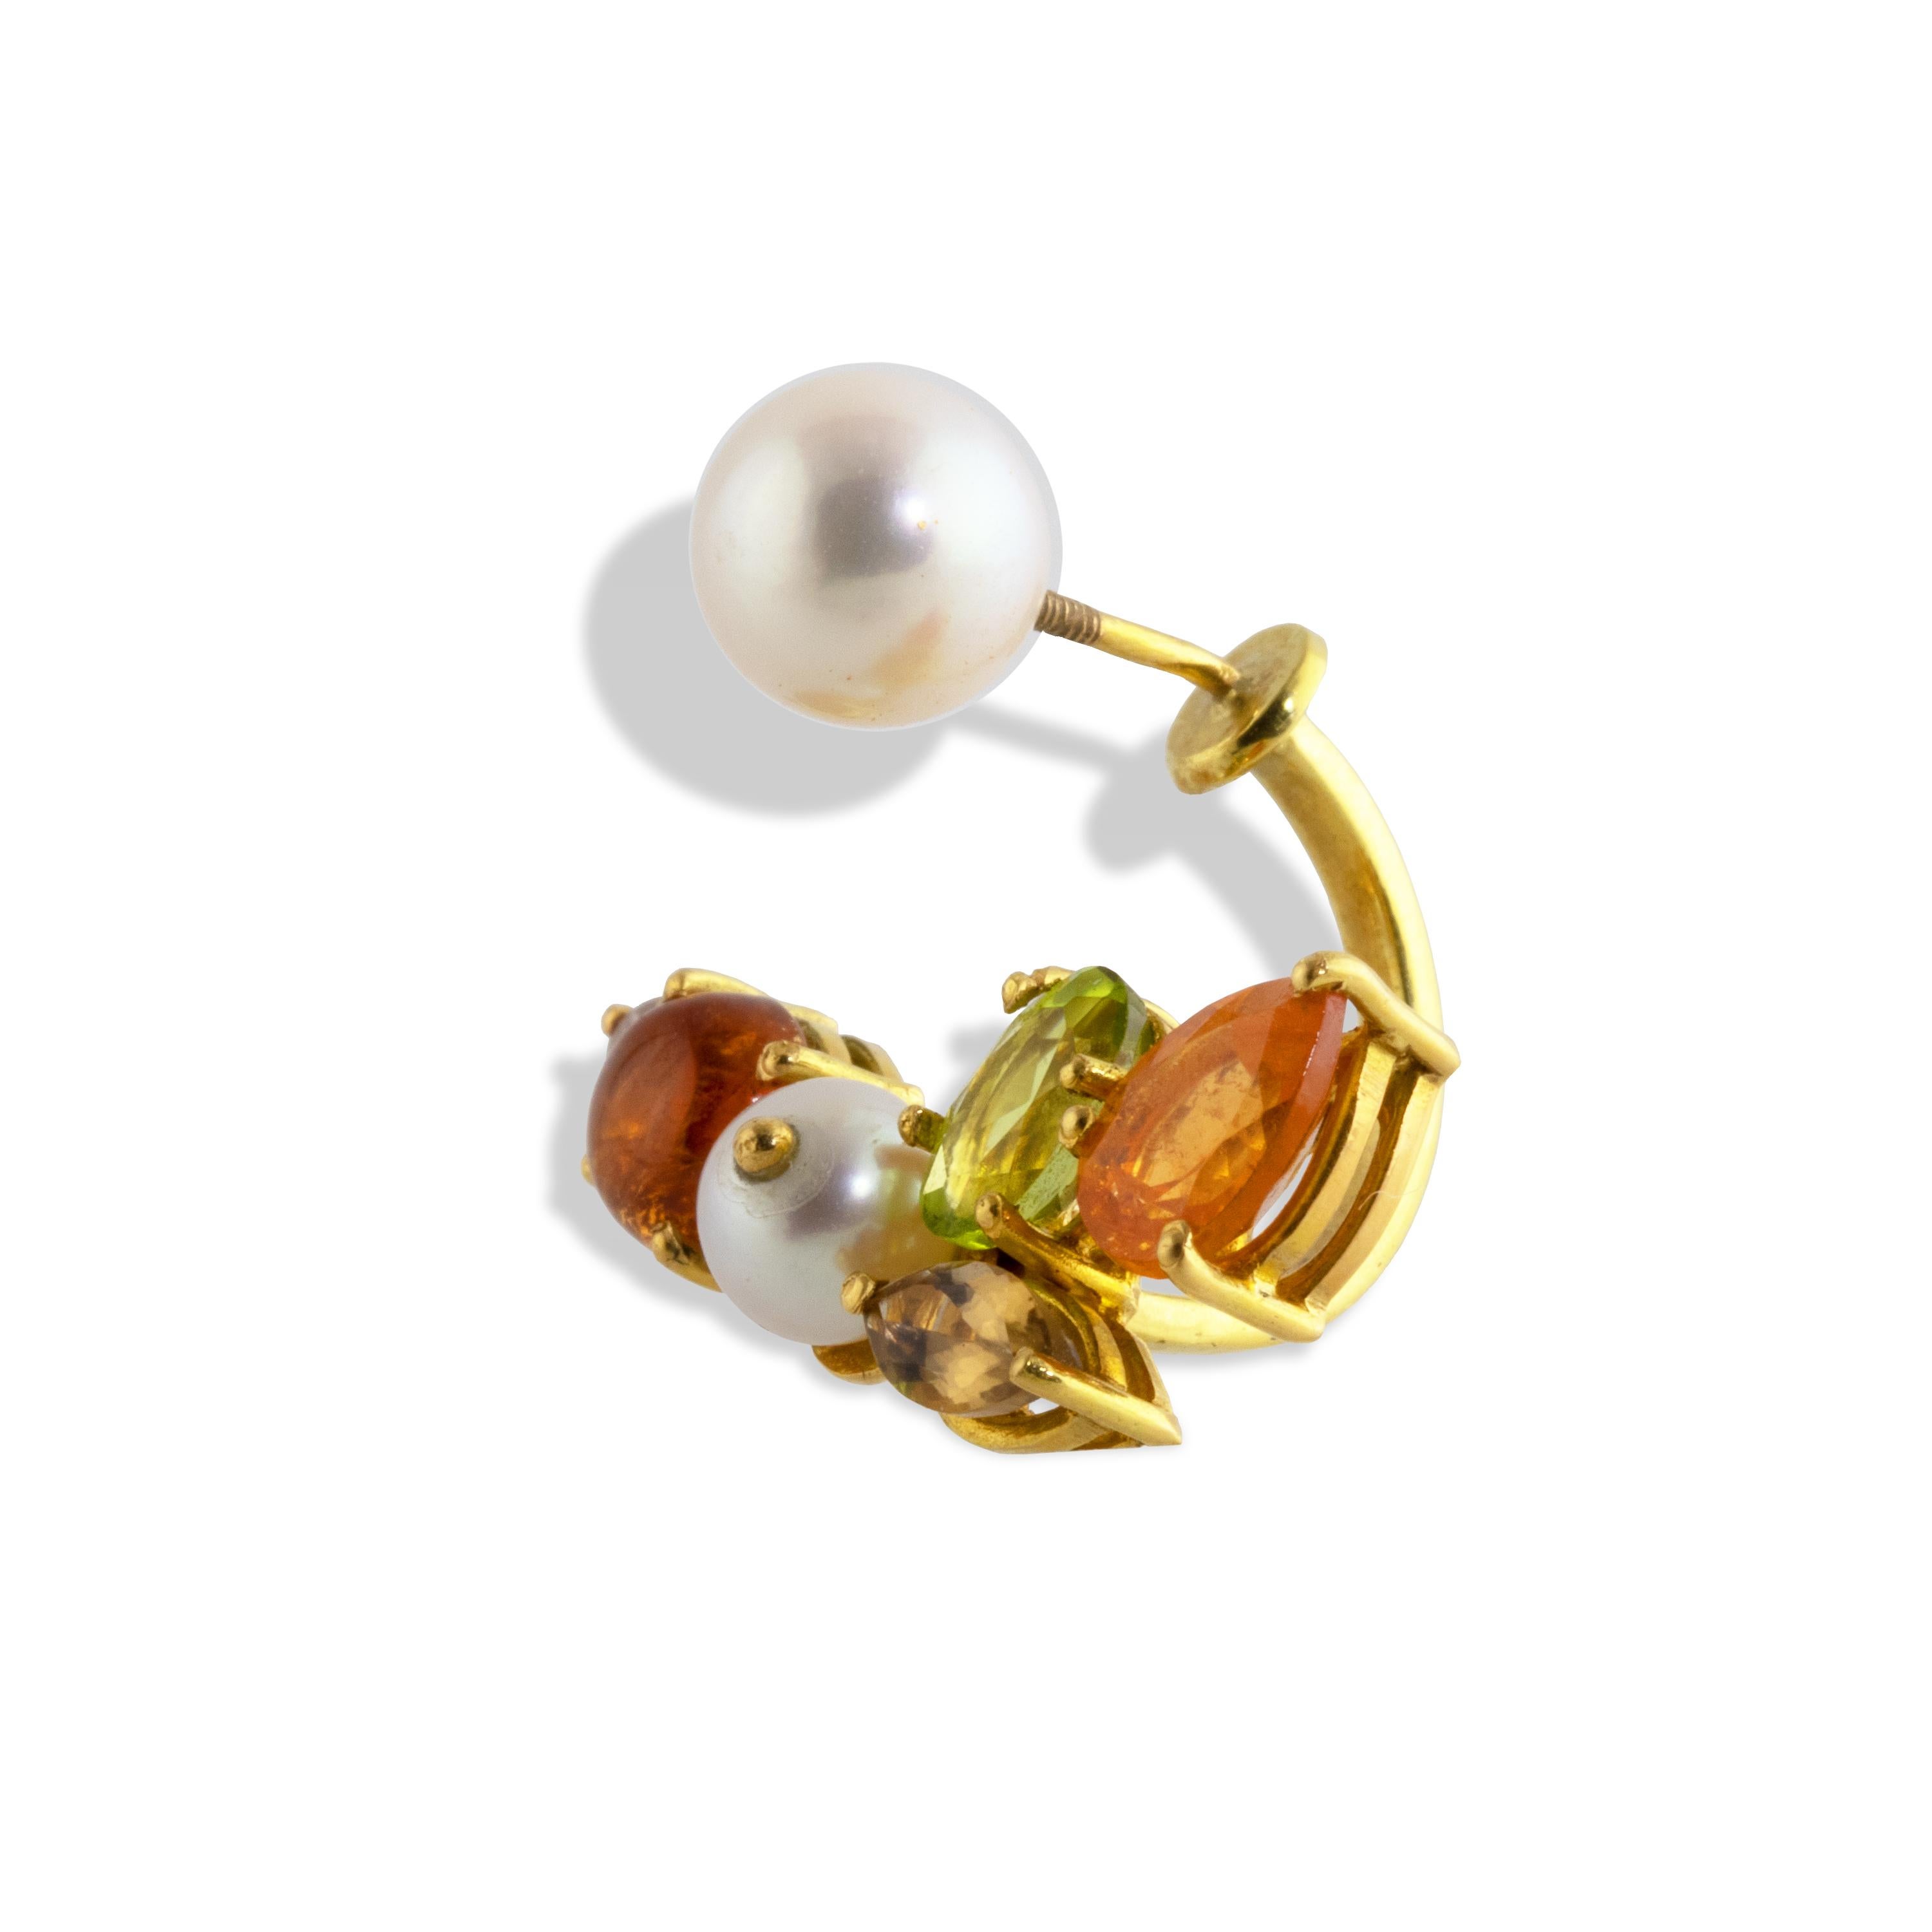 Golden colors of autumn are highlighted in this single 'flying' earring.
A cluster of Spessartite garnet, Citrine,  Morganite, Peridot, Diamond, and a Akoya Pearls, are set in 18k gold and curved to follow the edge of the ear for a dramatic, 